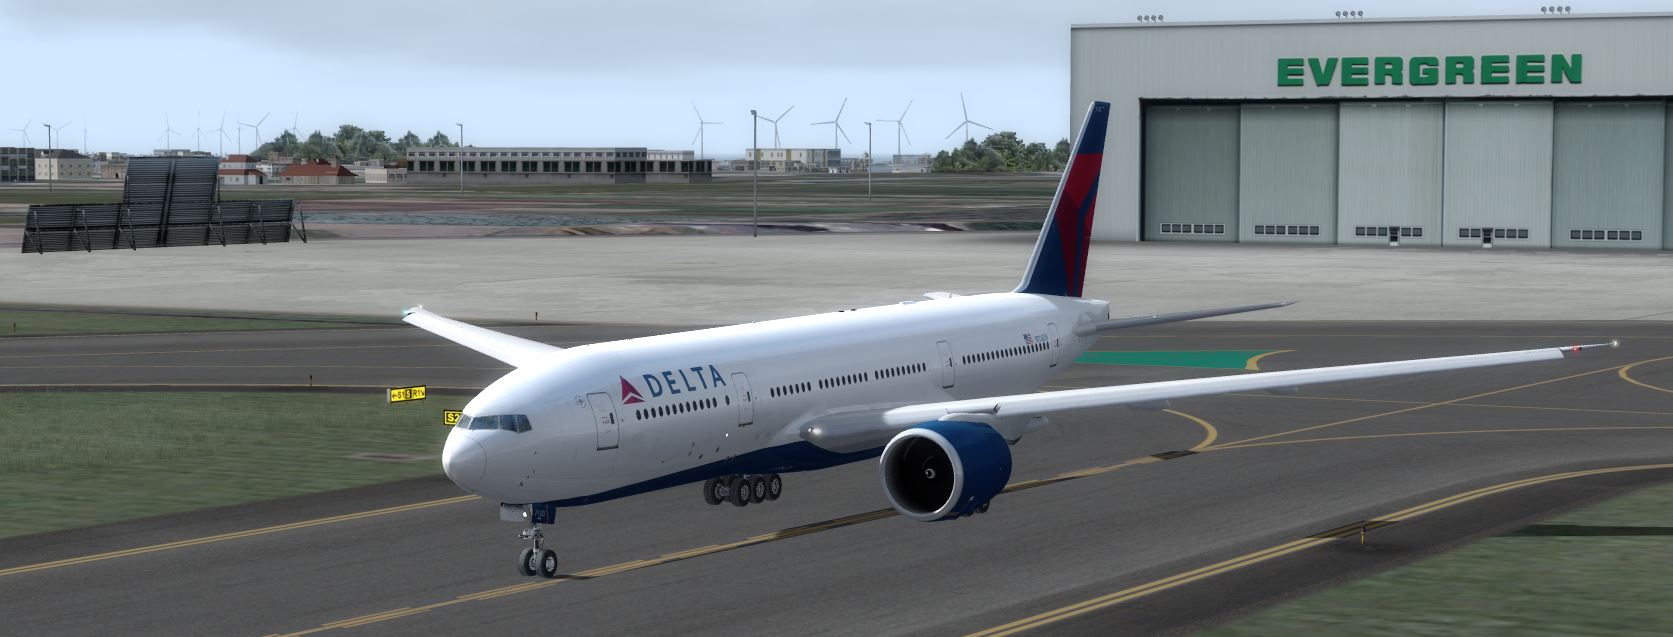 B777-200 Delta Airlines Standard Livery-8616 